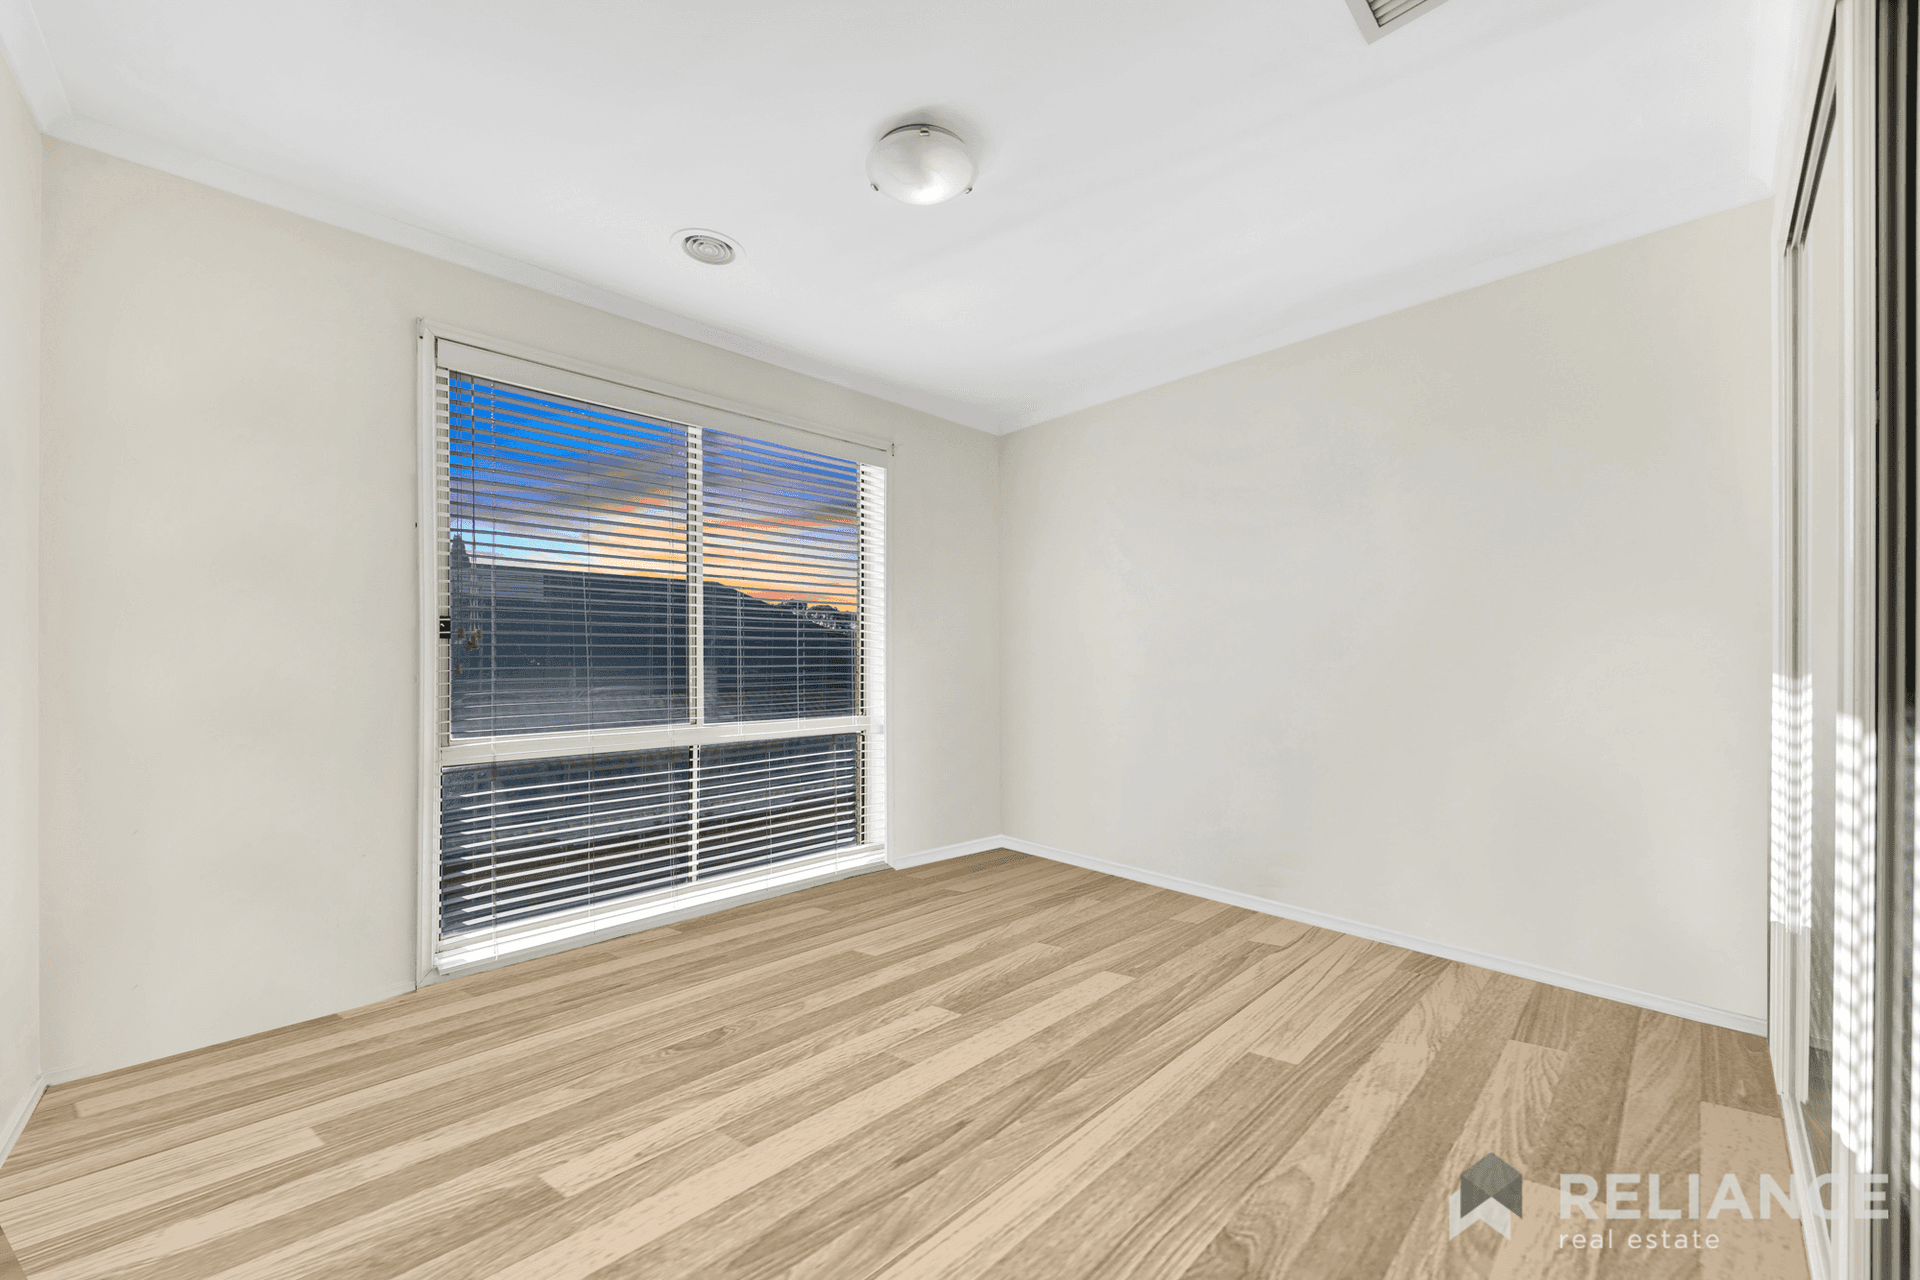 13 Wallace Place, Caroline Springs, VIC 3023